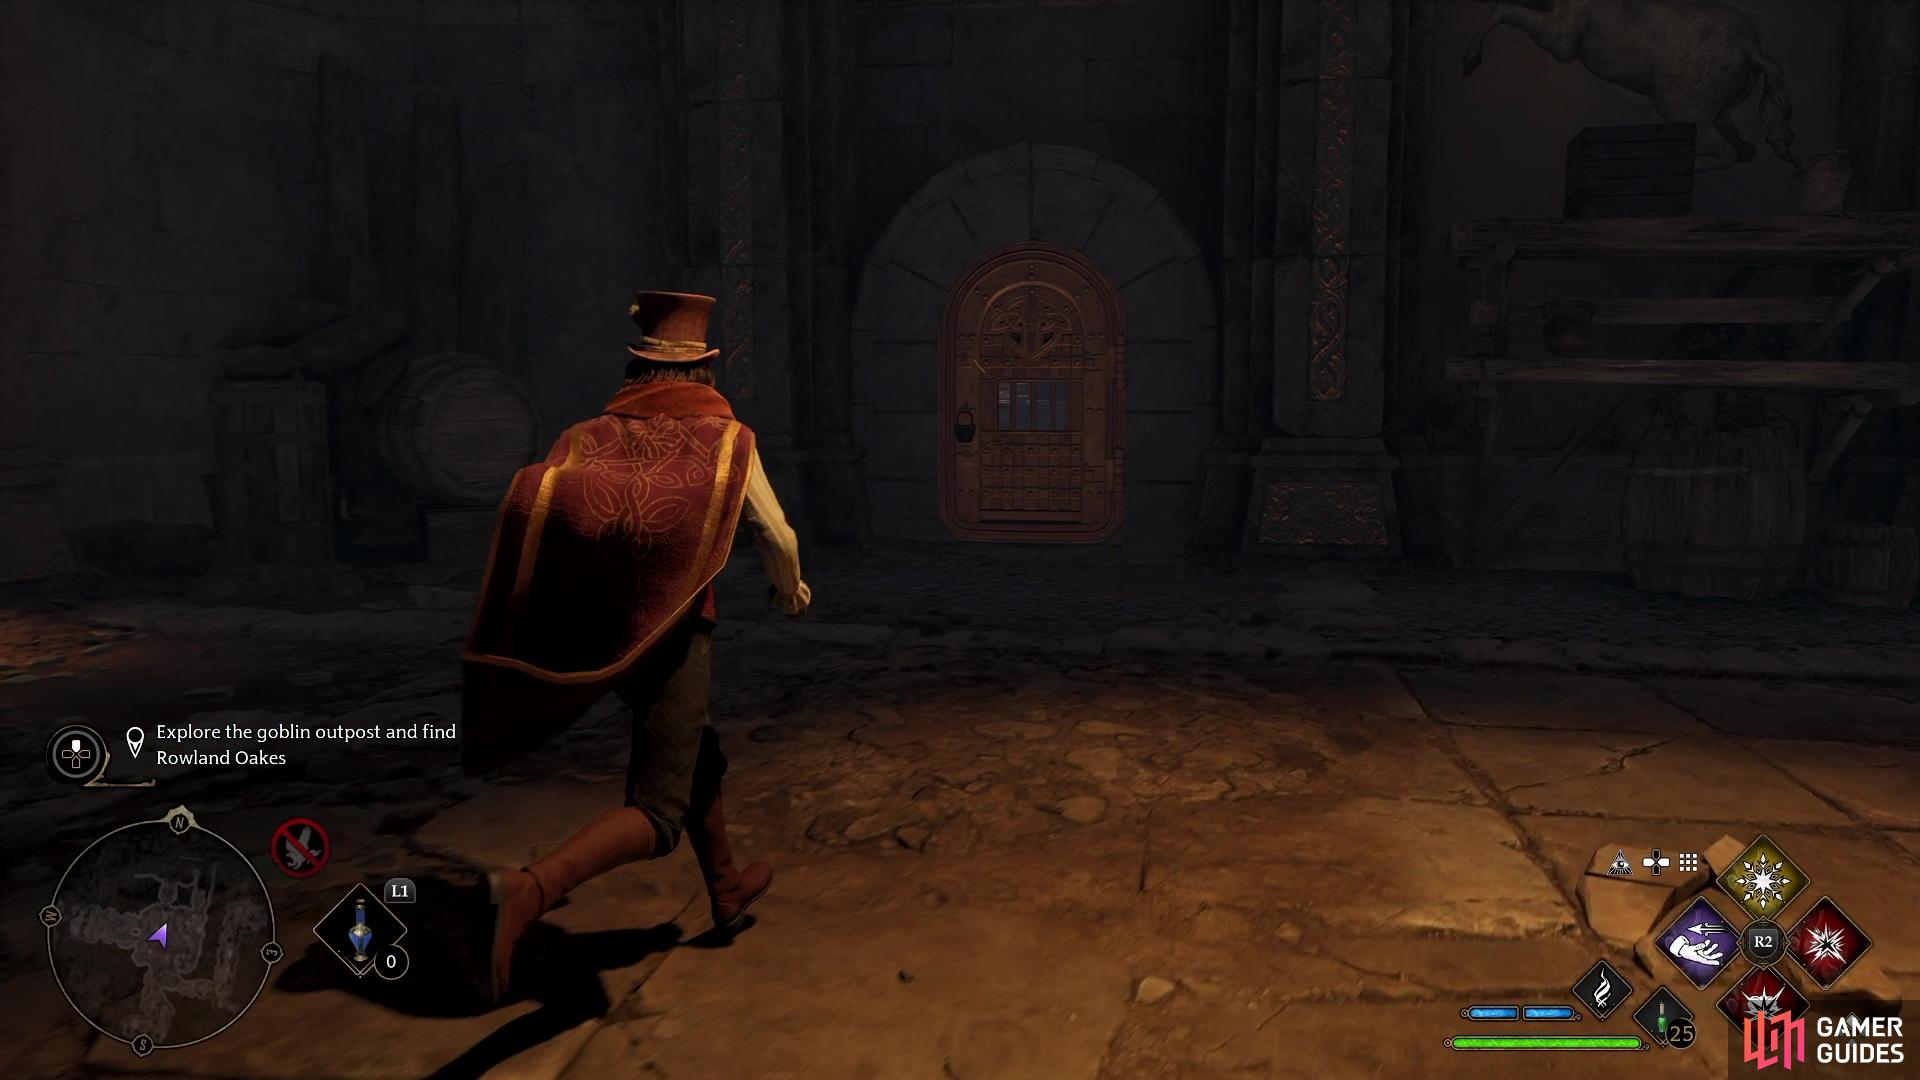 The treasure behind this locked door is the first of many secrets in Korrow Ruins.